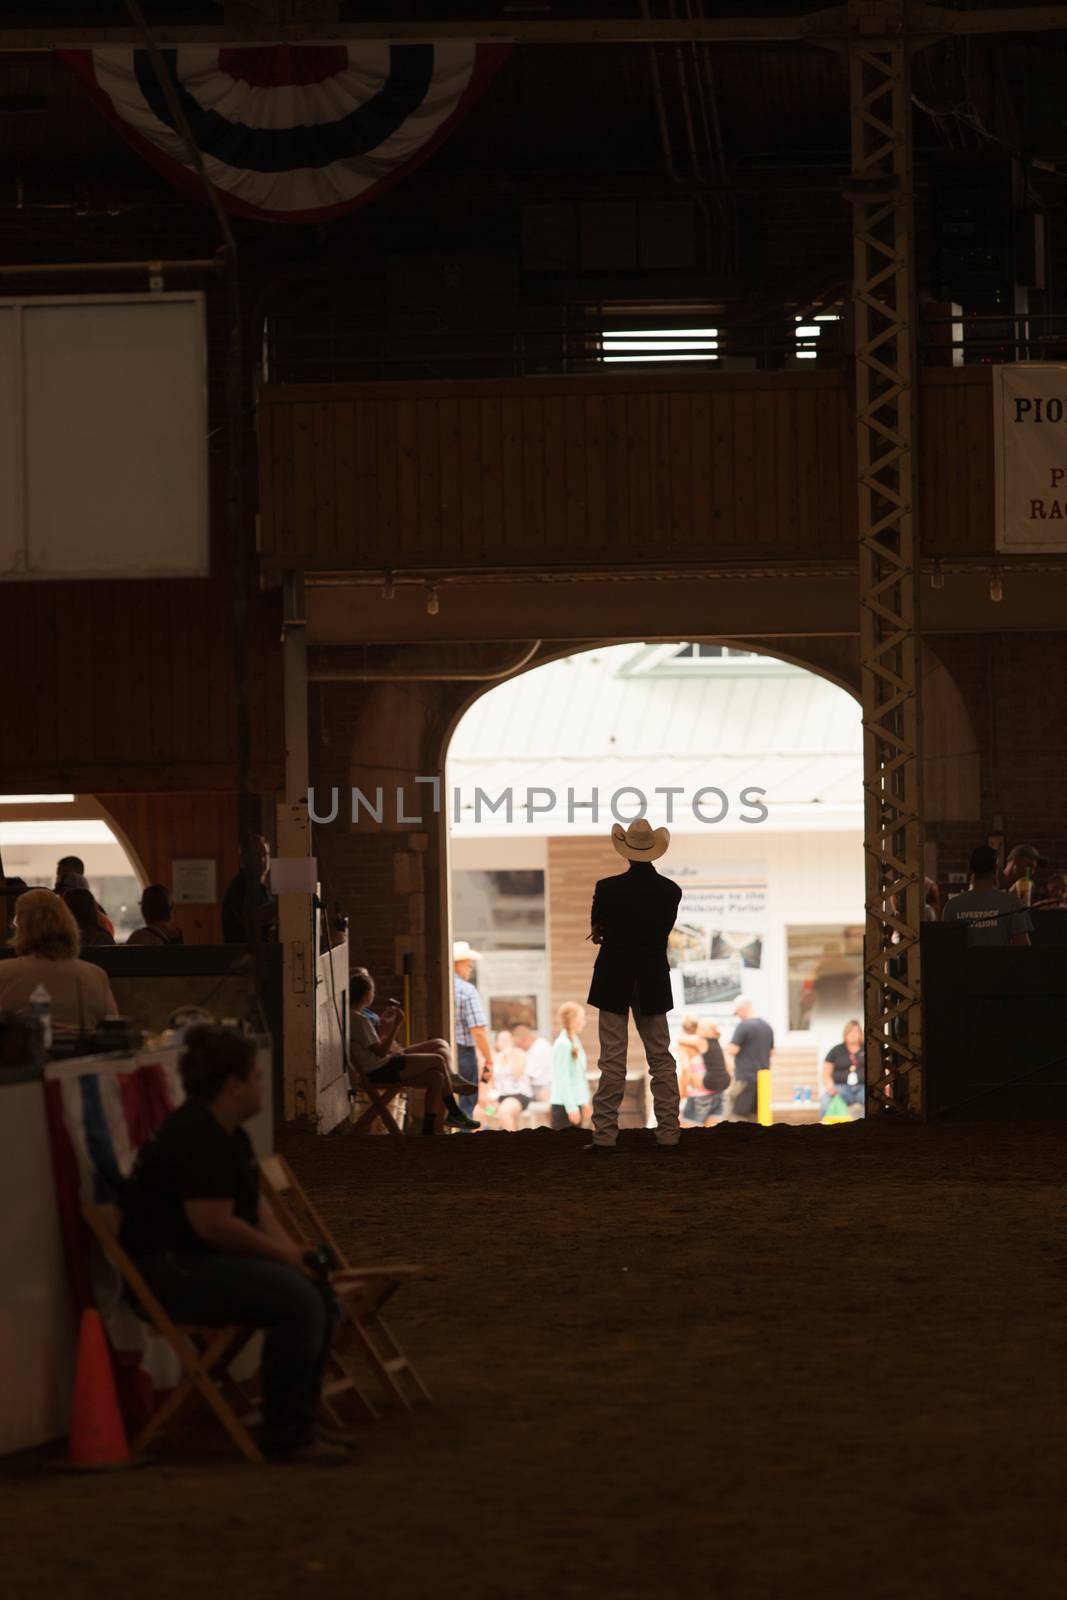 Waiting for livestock at fair by Creatista